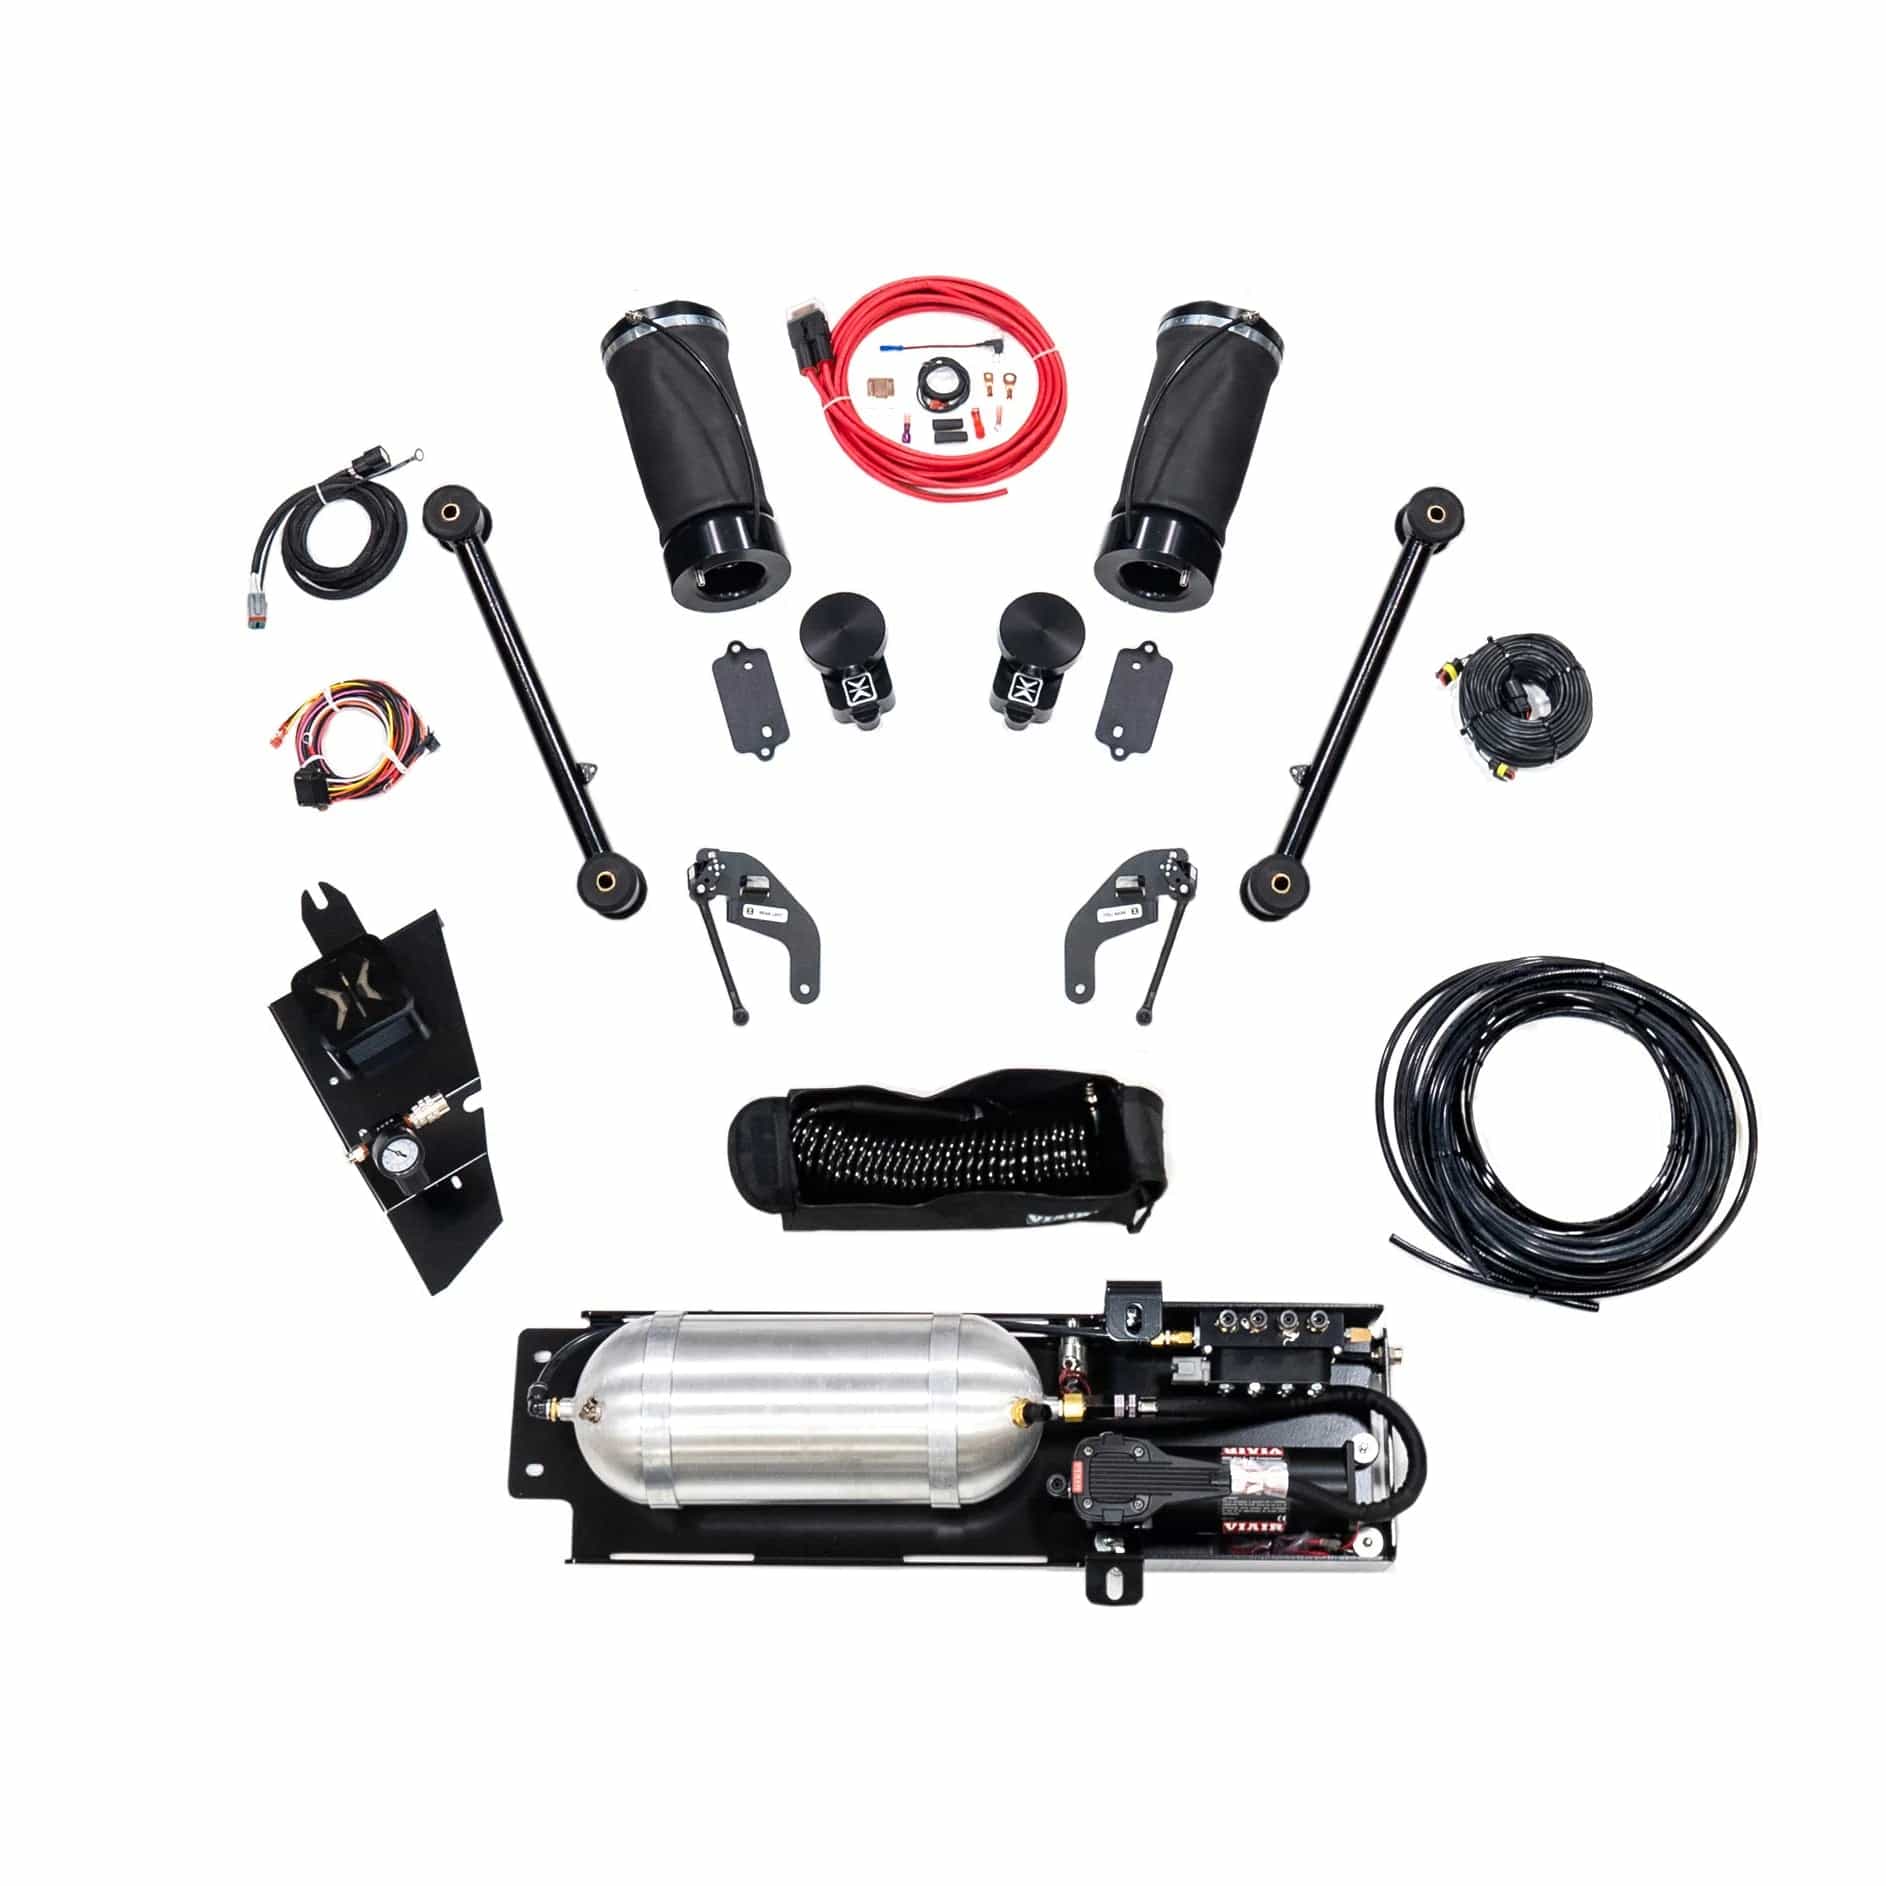 AccuAir Lift Kit (Rear Only) for 2007-2018 Jeep Wrangler (JK) AA-4415